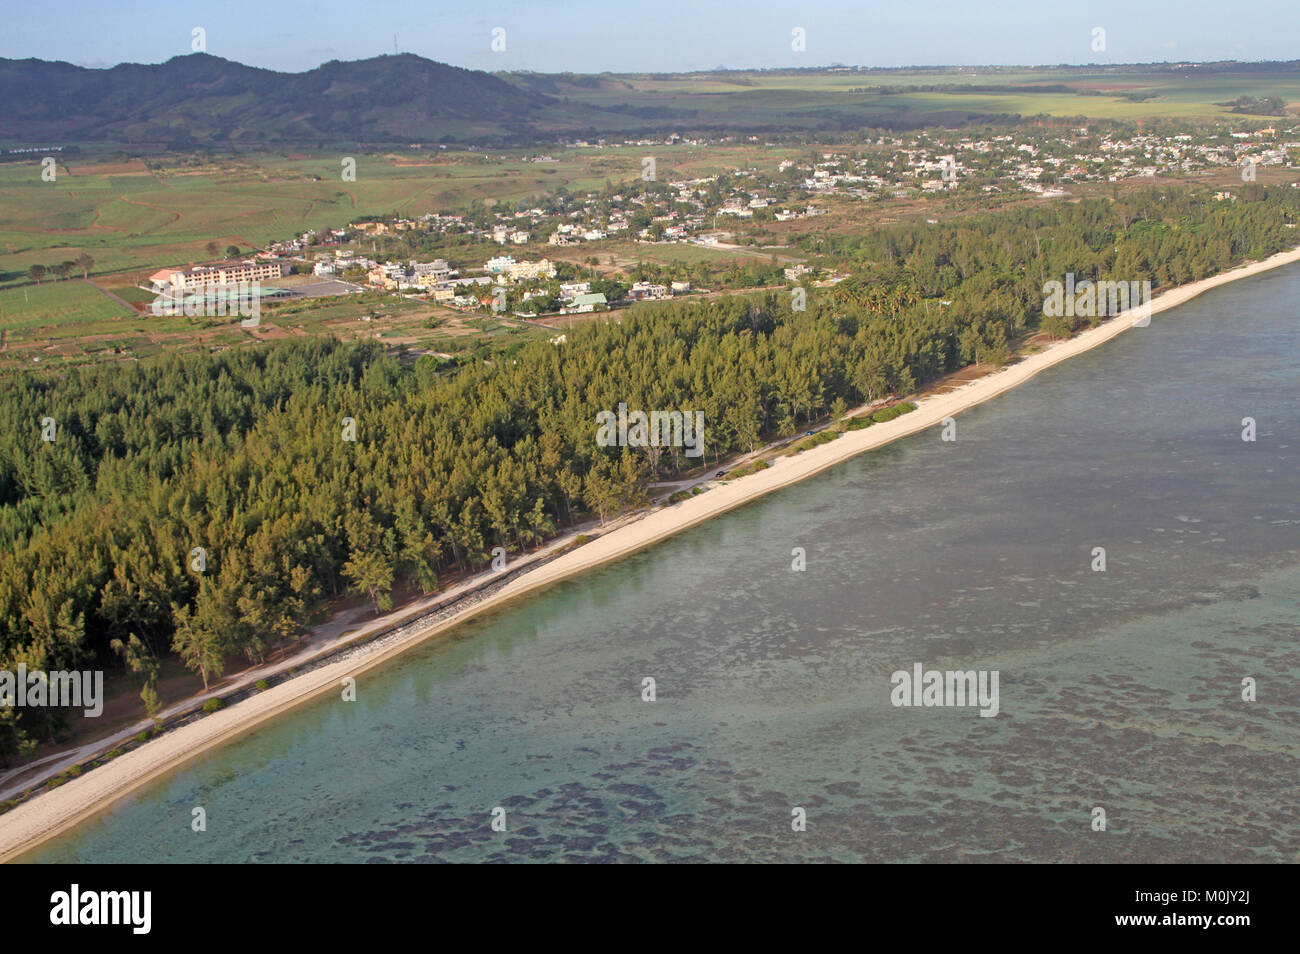 Village near beach seen from helicopter, Savanne district, Republic of Mauritius. Stock Photo